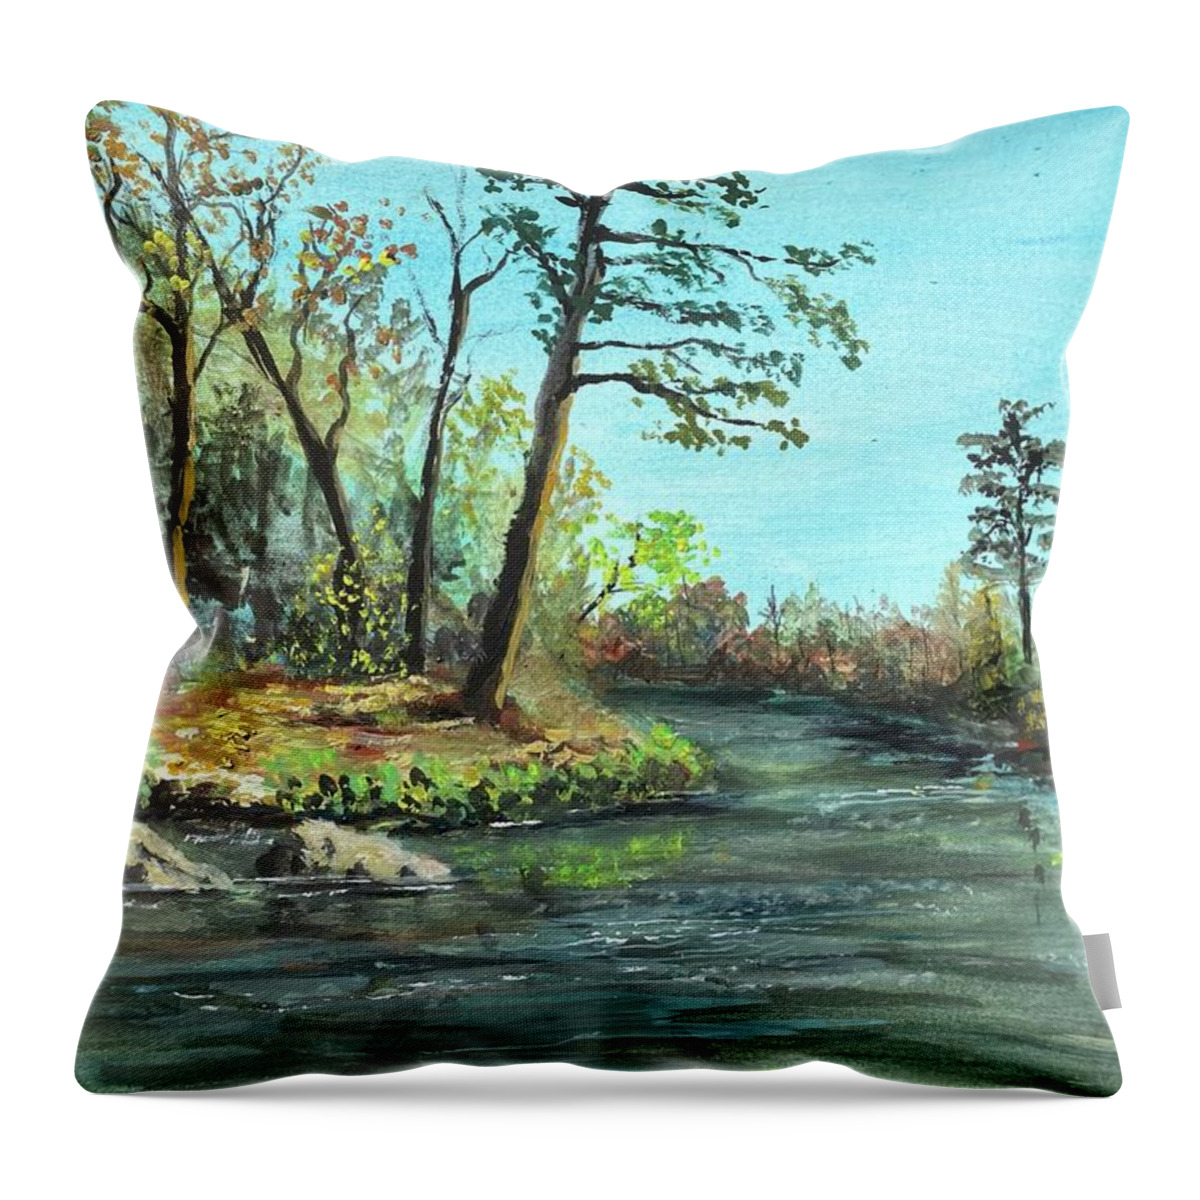 Towaliga River Throw Pillow featuring the painting Towaliga River by Larry Whitler